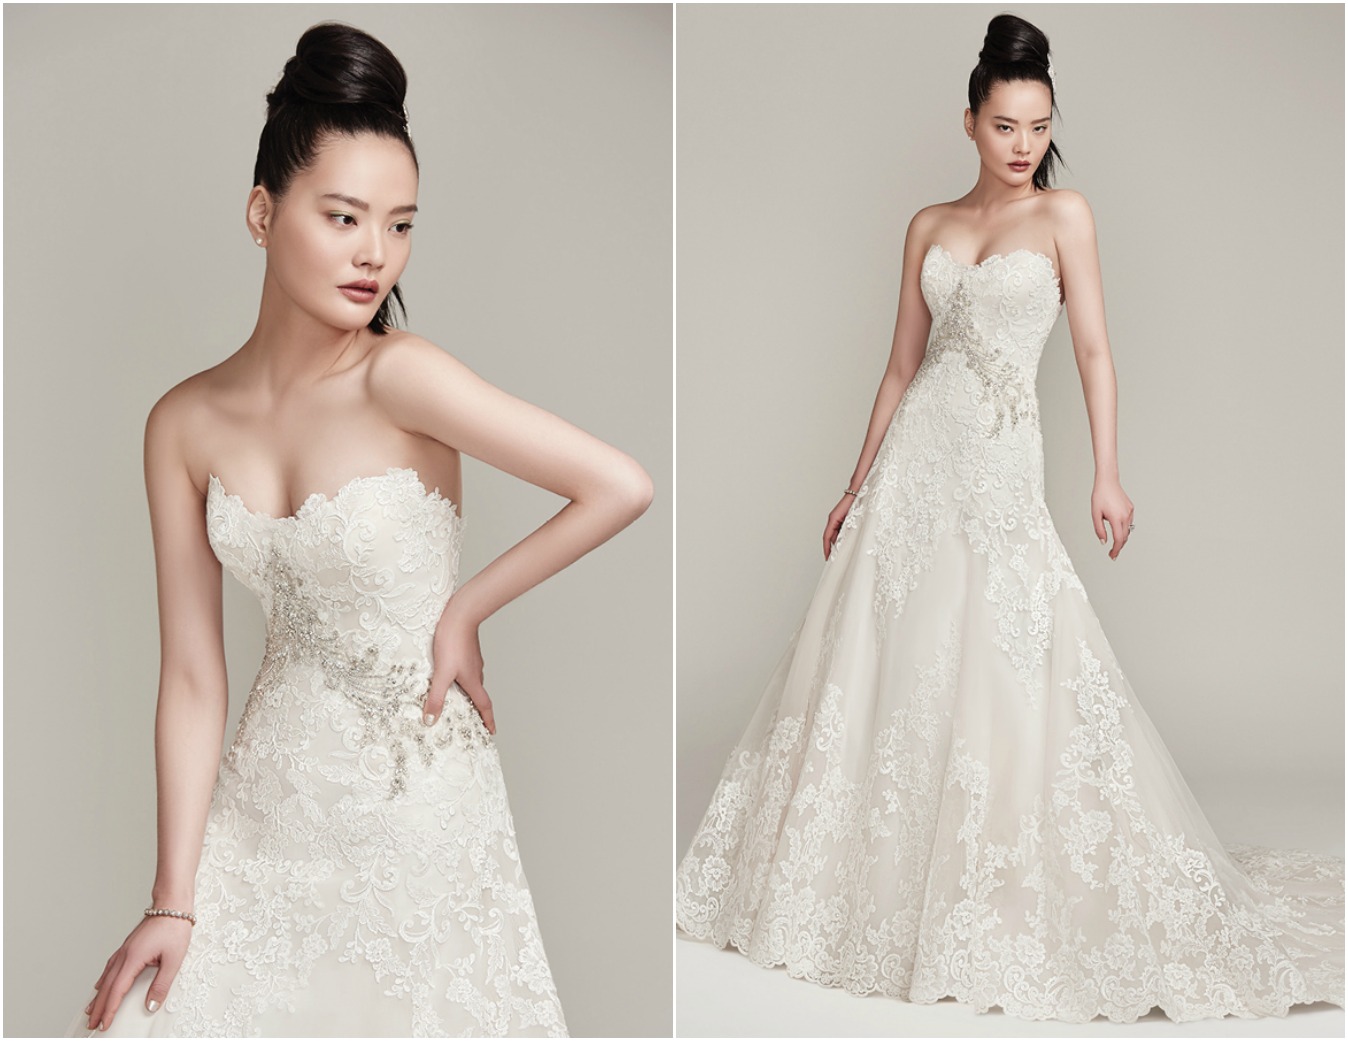 Embroidered lace and tulle add luxurious dimension to this full A-line wedding dress with scalloped scoop neckline and hemline and Swarovski crystal embellishment accenting the natural waist. Finished with crystal buttons over zipper with inner corset closure.

<a href="https://www.maggiesottero.com/sottero-and-midgley/walker/9888" target="_blank">Sottero &amp; Midgley</a>